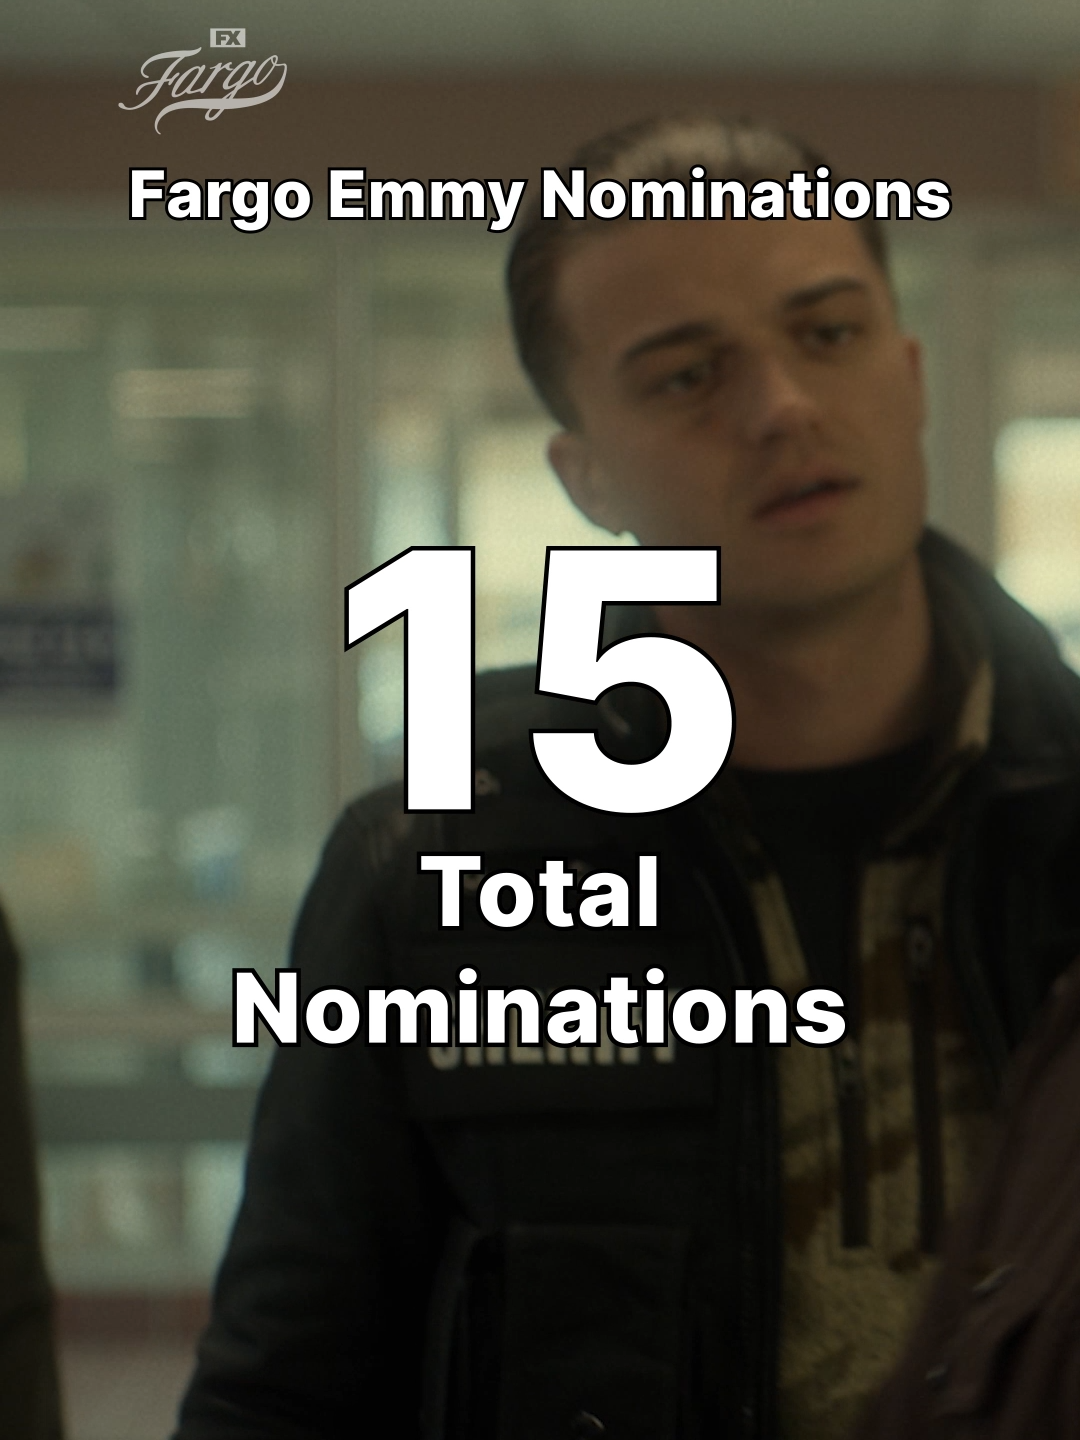 We're excited to share that #Fargo is #EmmyNominated in a whopping 15 categories! #Emmys